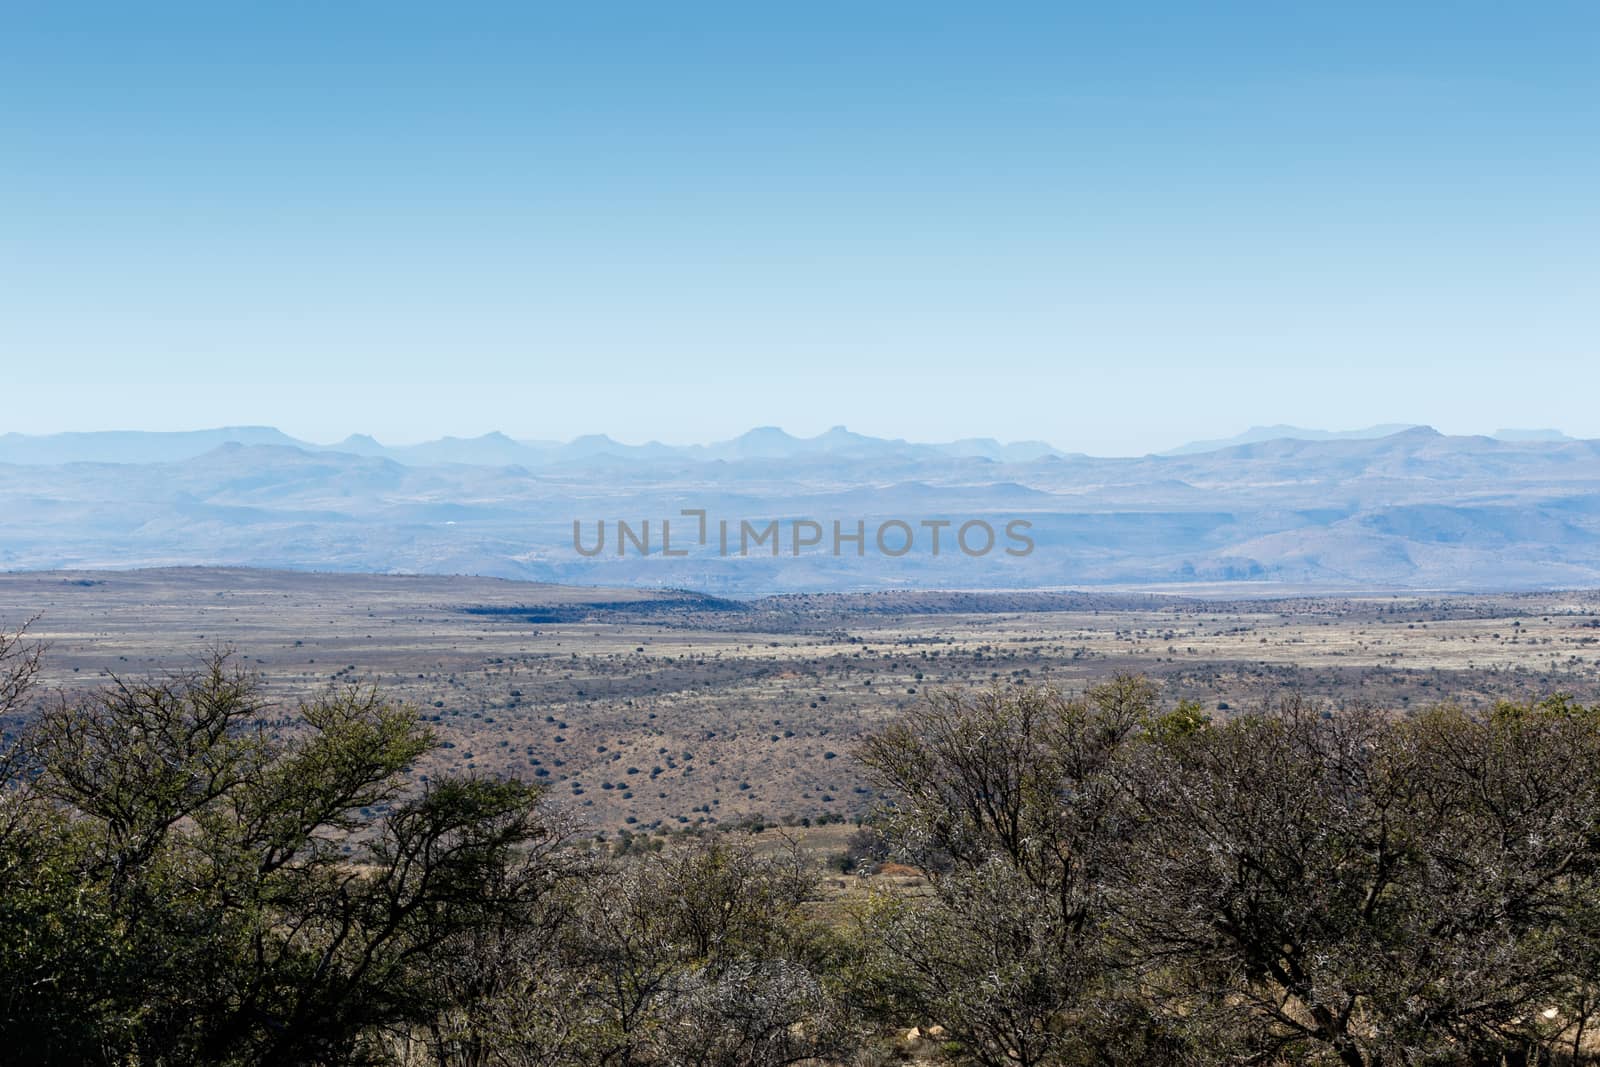 Mountain Zebra National Park with the view of the mountains.